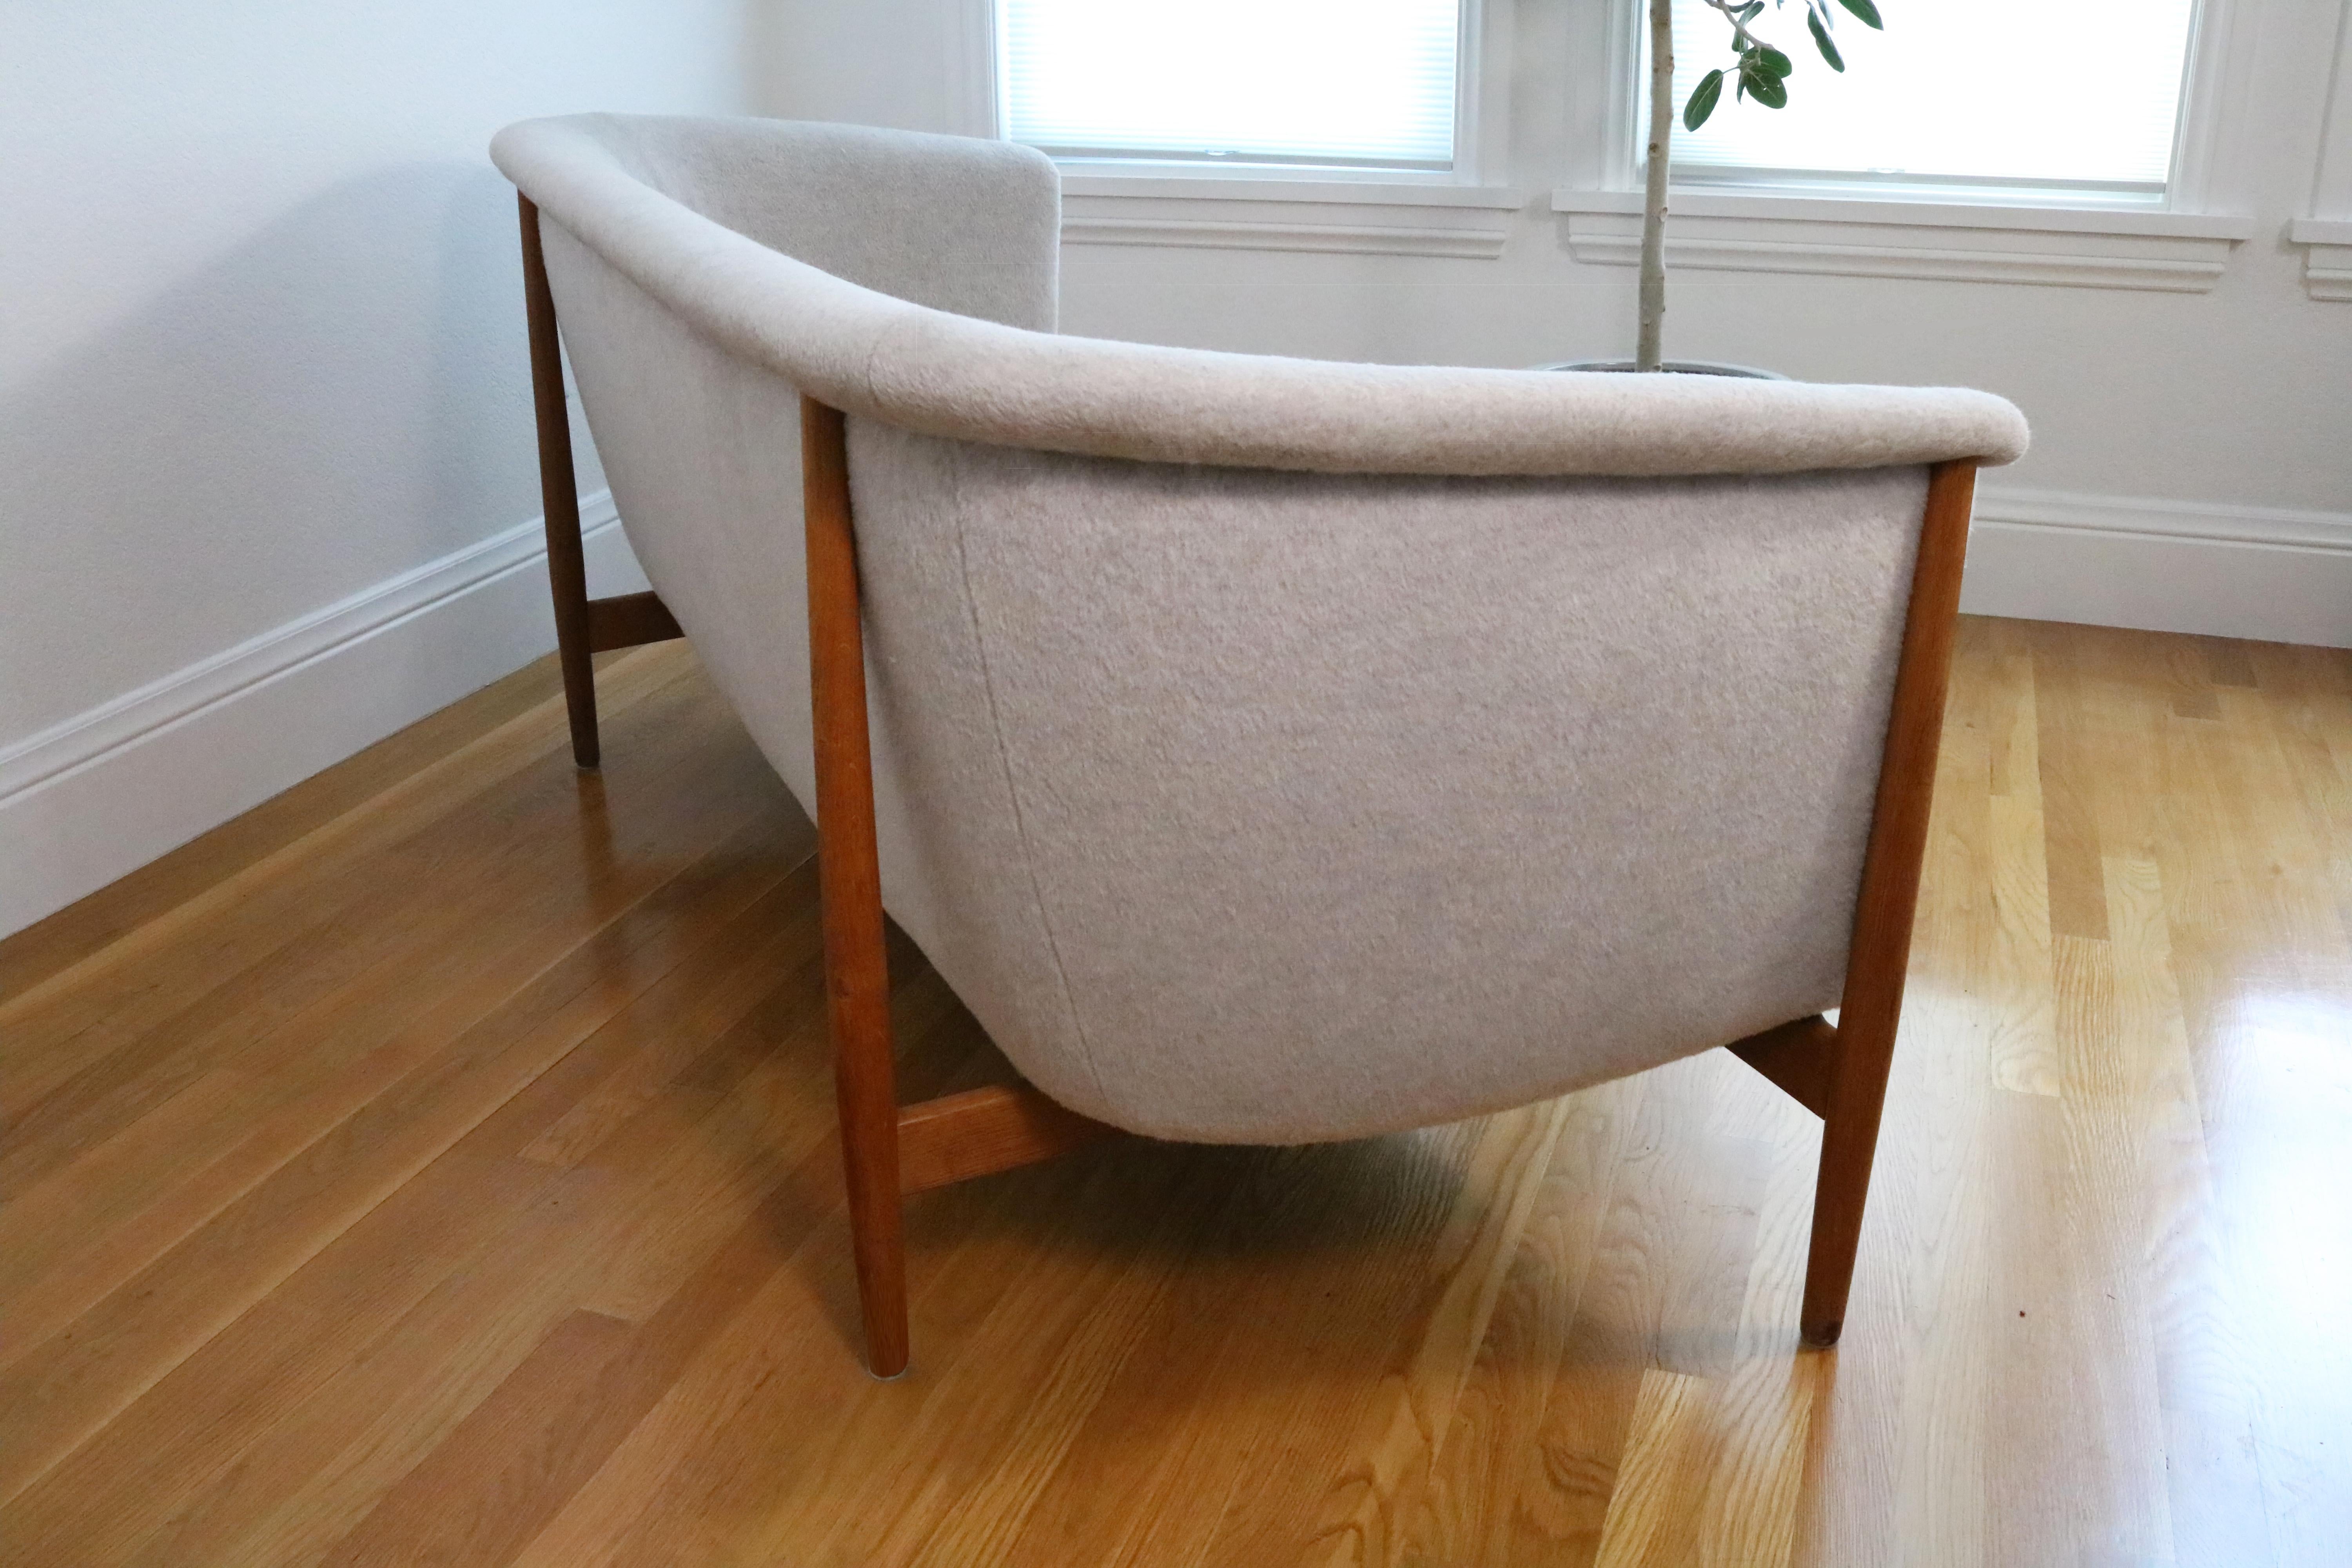 A rare and iconic Nanna Ditzel sofa for Søren Willadsen, designed and manufactured in the 1950s.

Recently reupholstered in luxuriously soft premium pale grey wool upholstery. External frame in old growth white oak.

In excellent vintage condition.